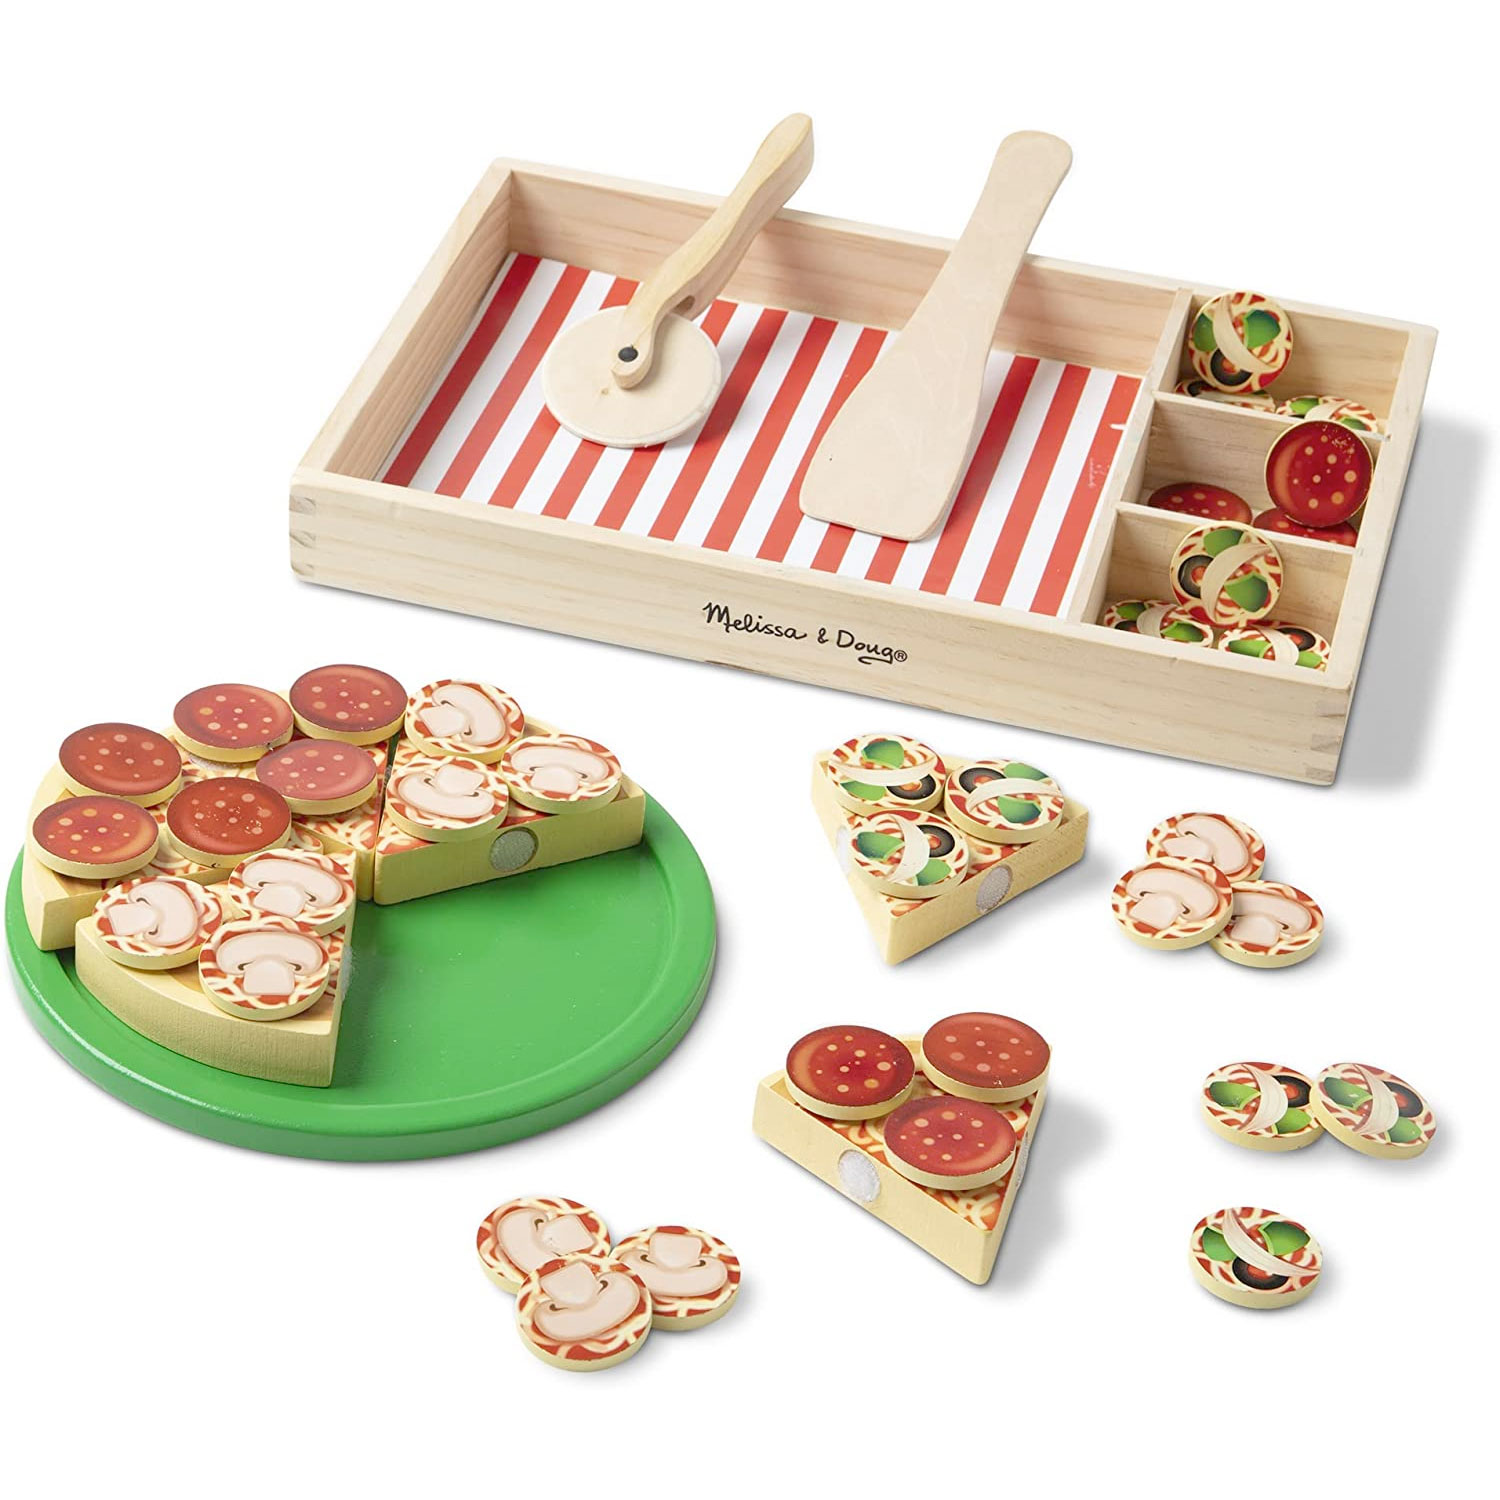 Amazon：Melissa & Doug Wooden Pizza Play Food Set With 36 Toppings只賣$22.39